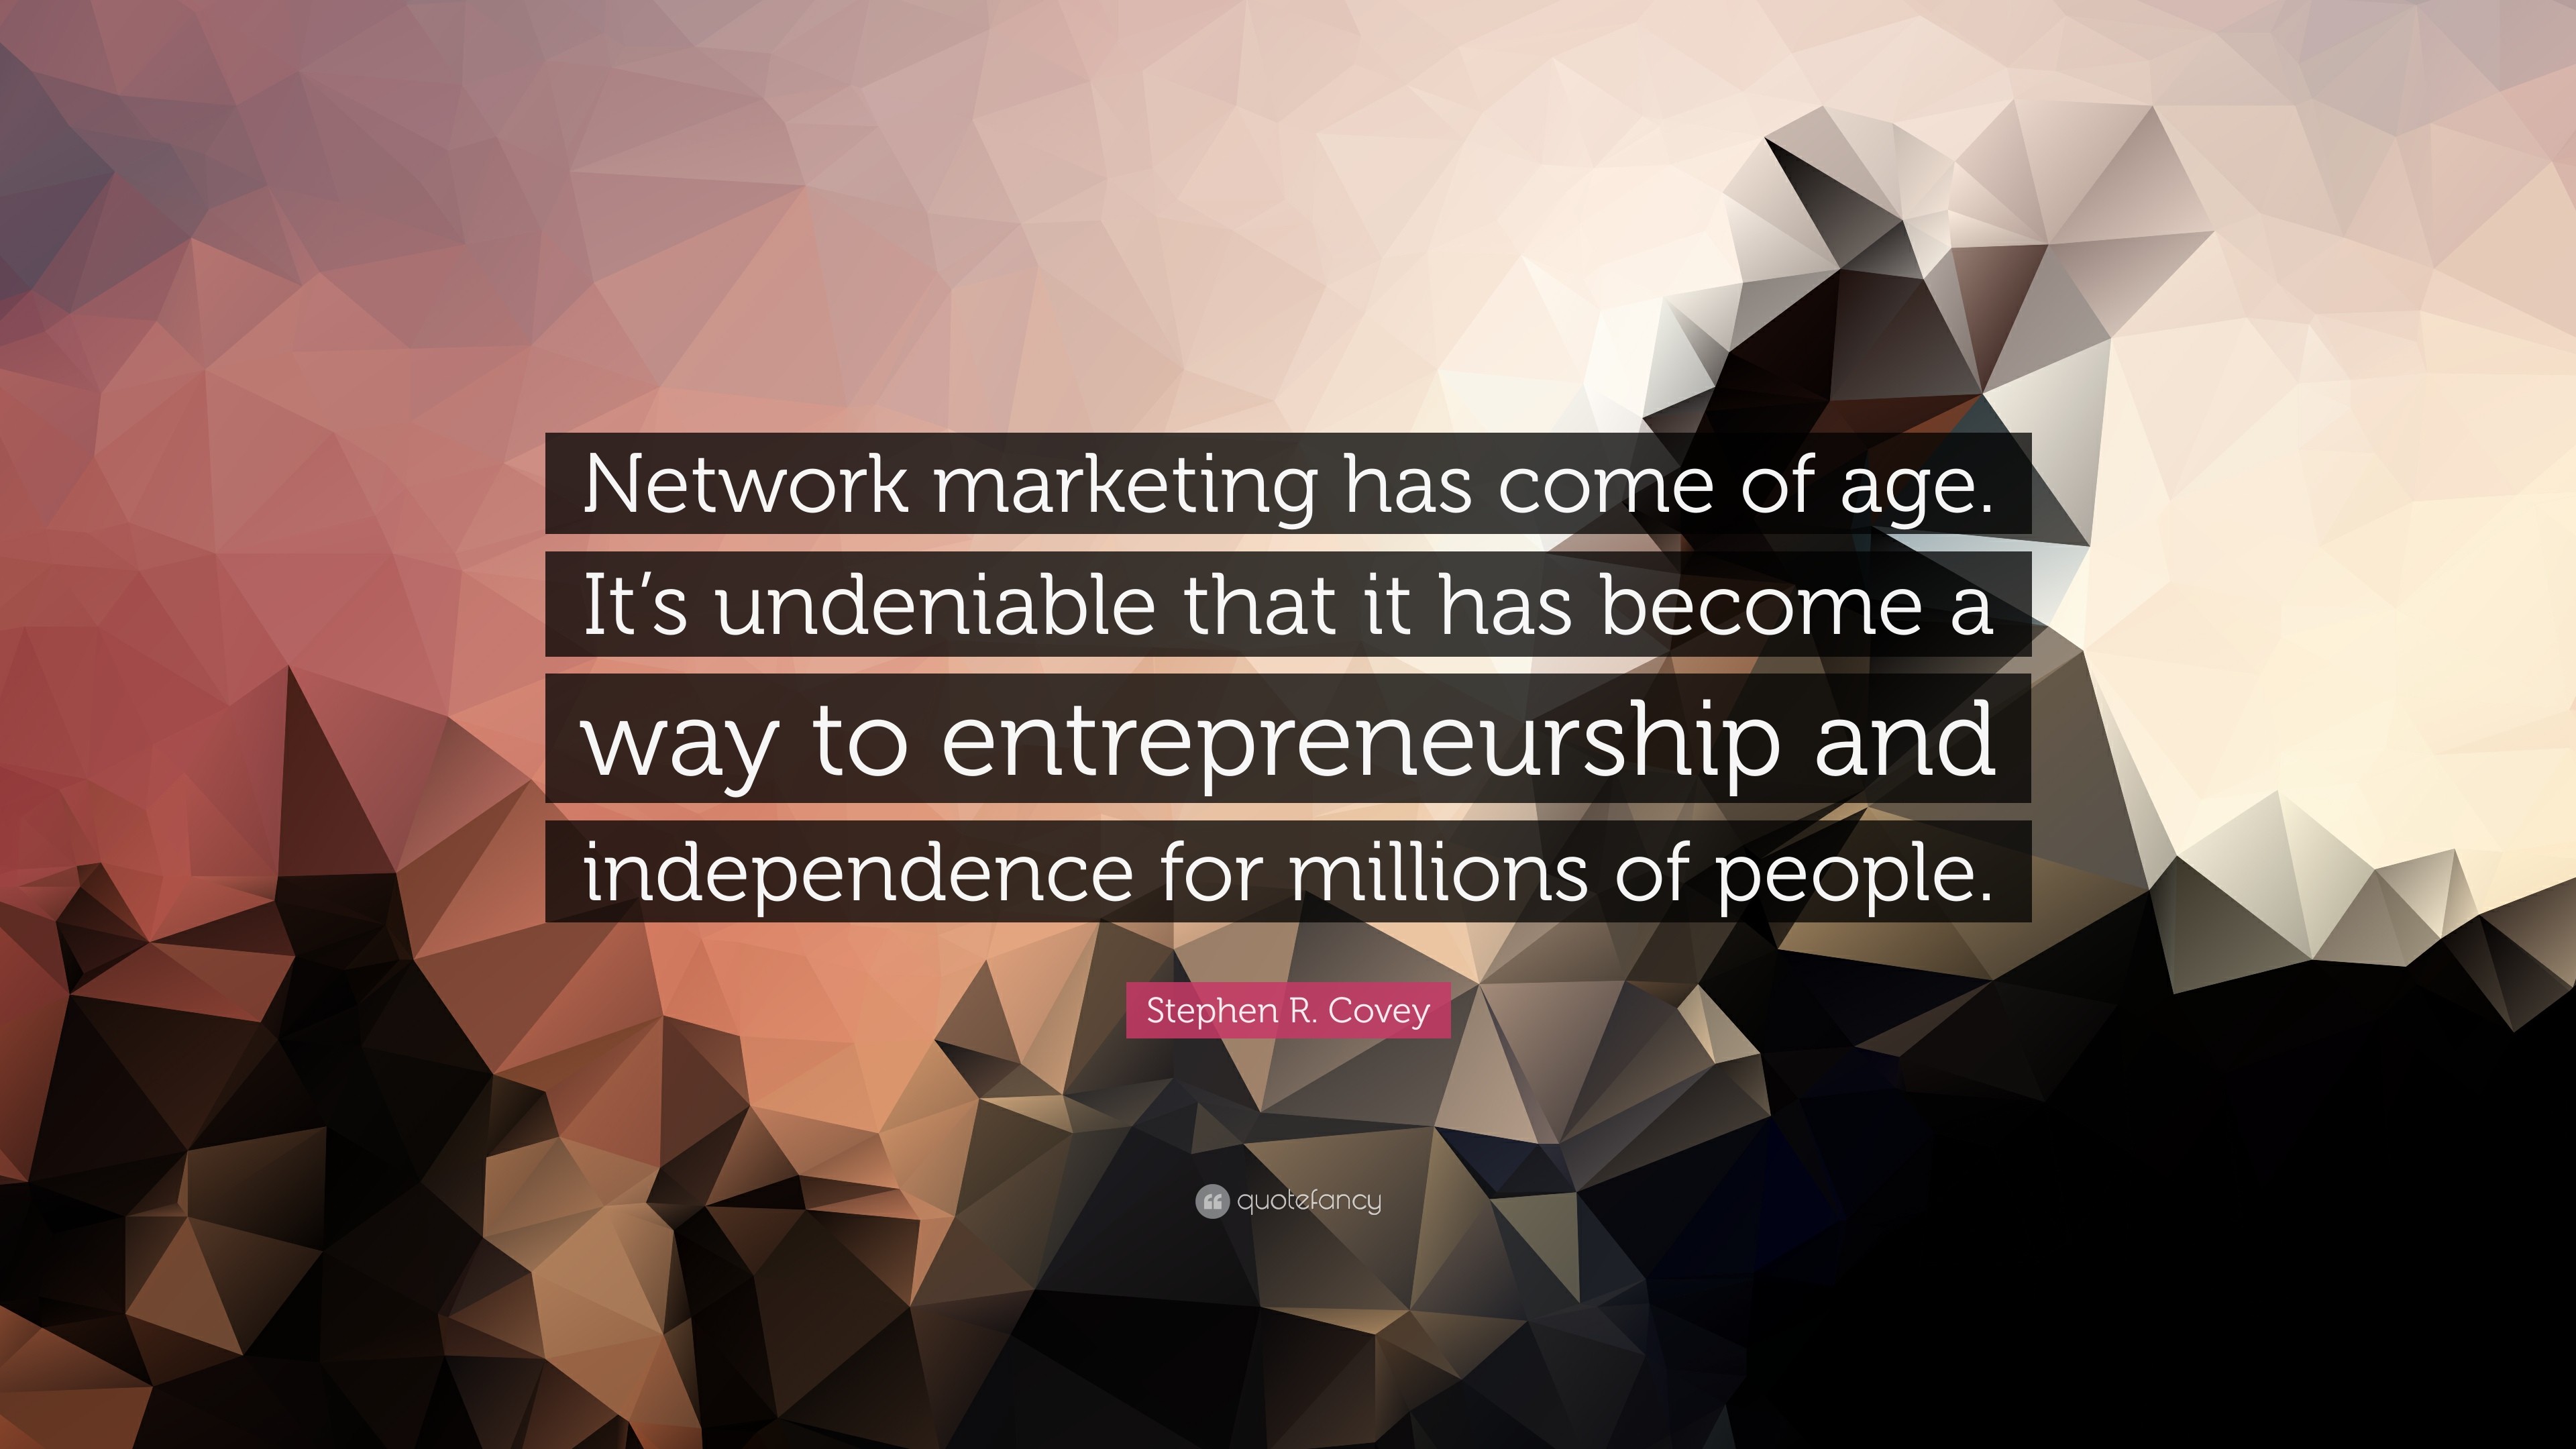 3840x2160 Marketing Quotes: “Network marketing has come of age. It's undeniable that  it has